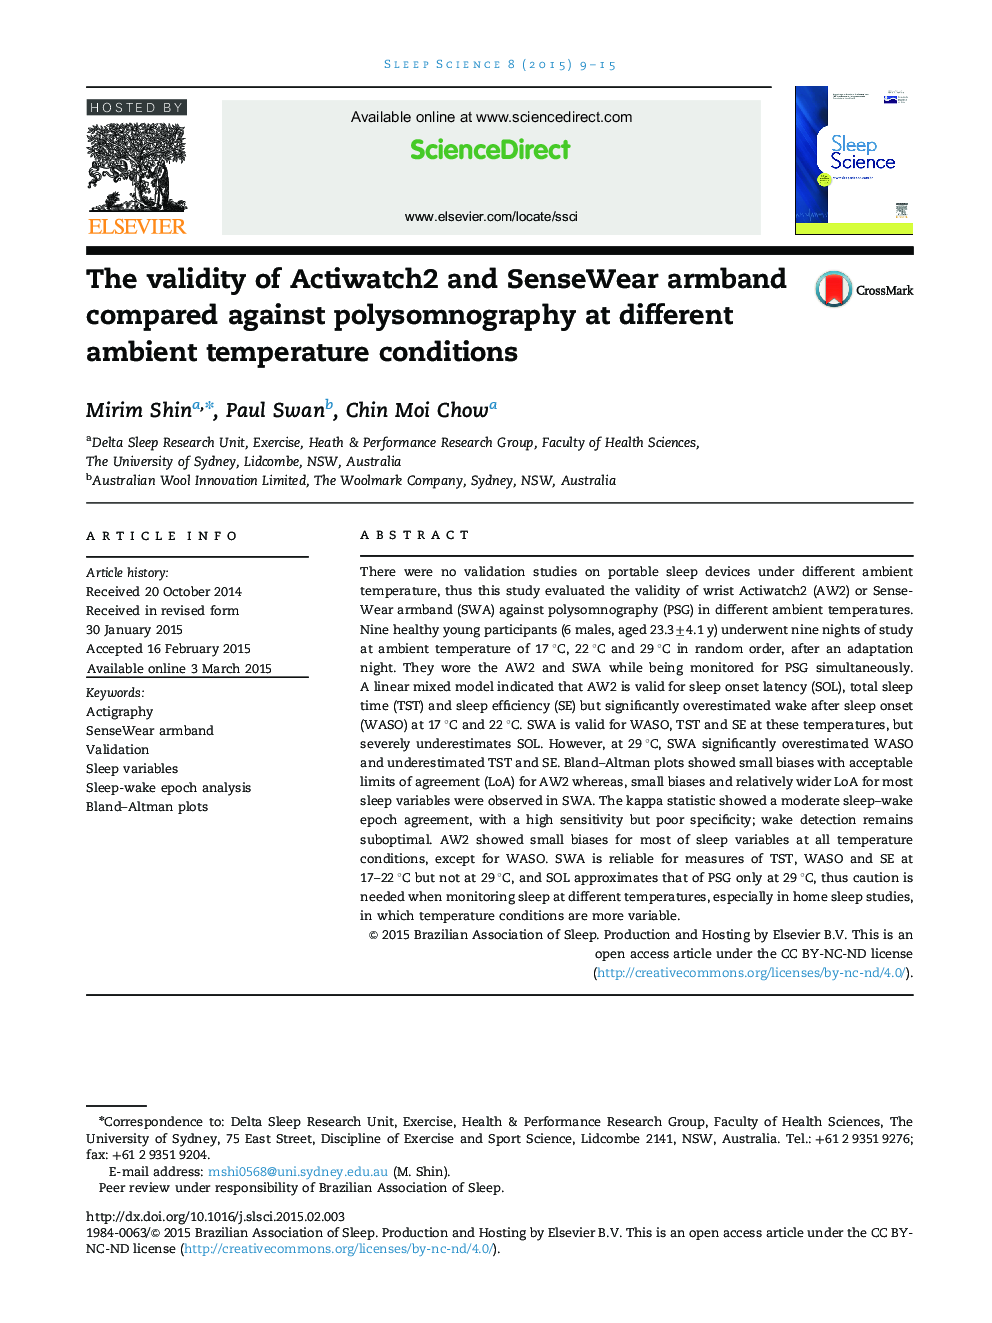 The validity of Actiwatch2 and SenseWear armband compared against polysomnography at different ambient temperature conditions 